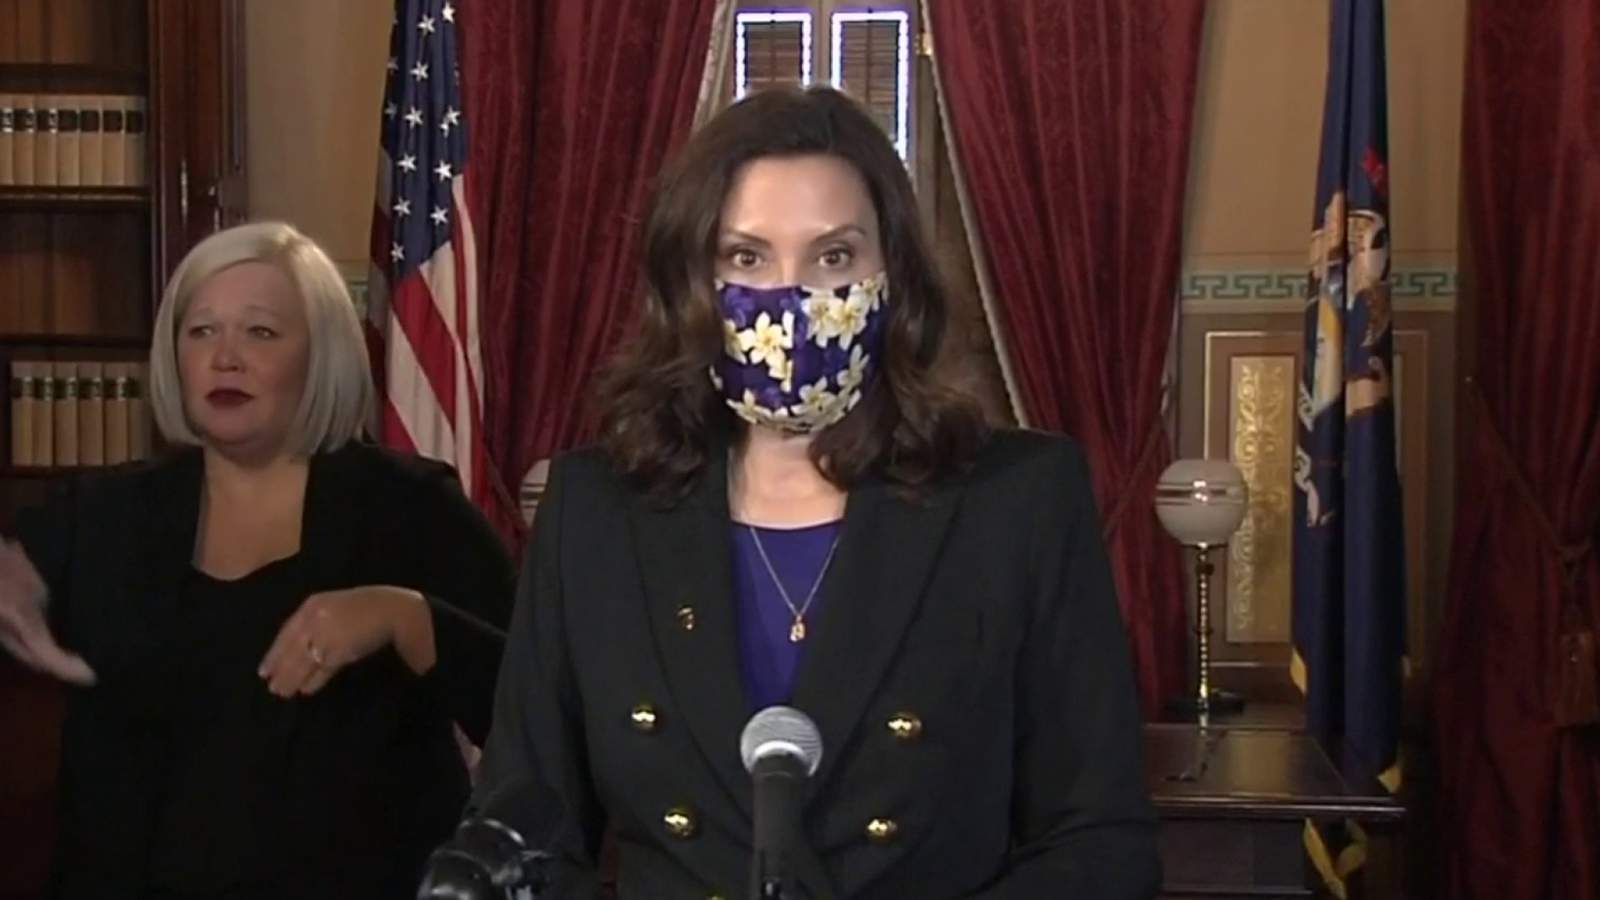 Gov. Whitmer outlines plan to jumpstart Michigan’s economy, end COVID-19 pandemic